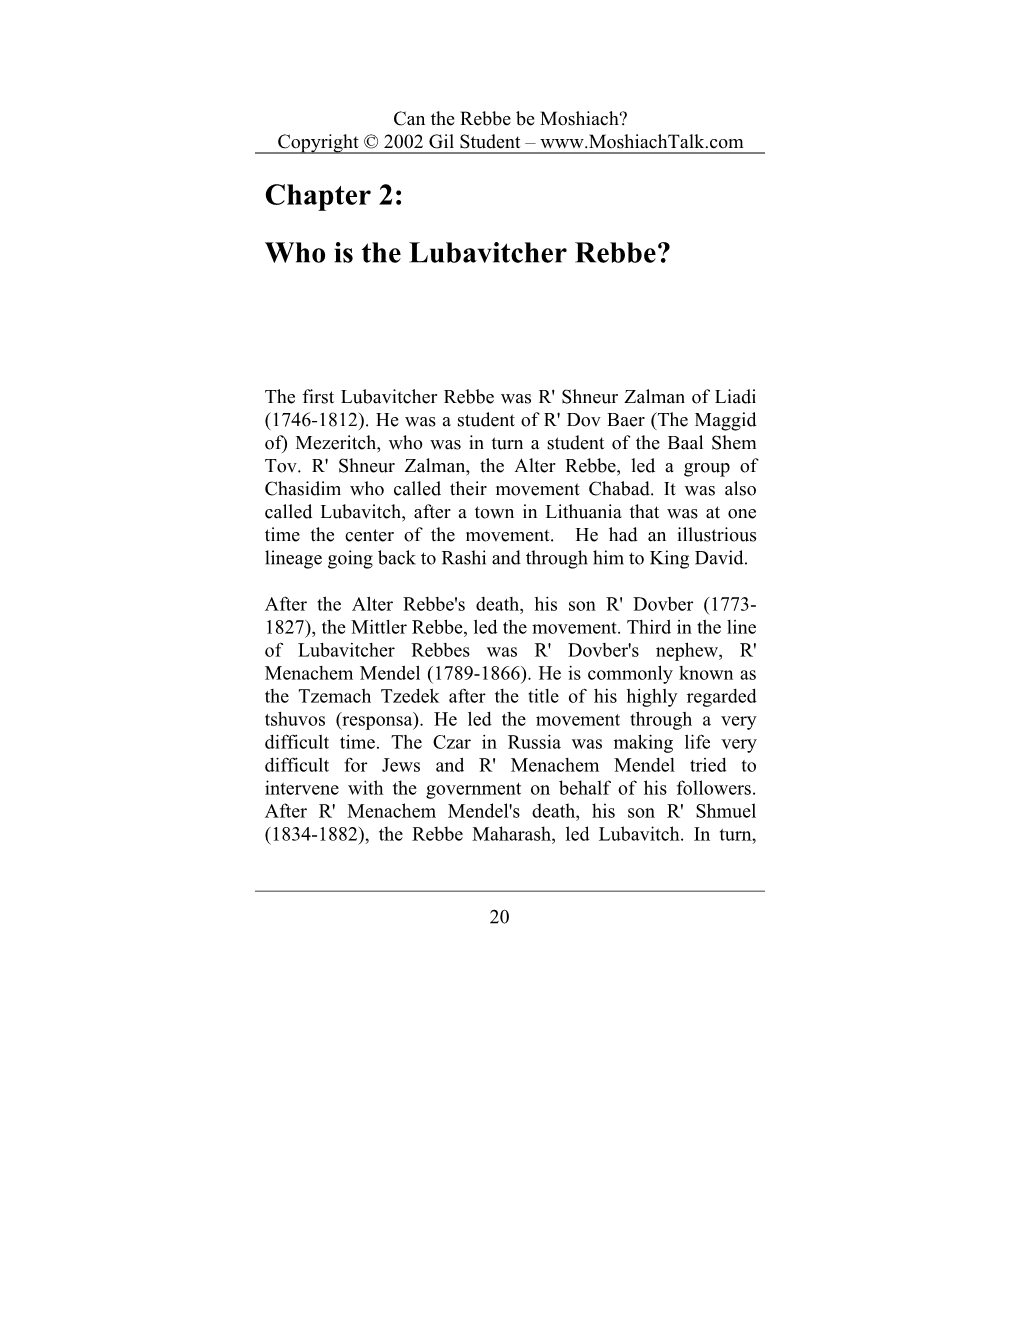 Chapter 2: Who Is the Lubavitcher Rebbe?